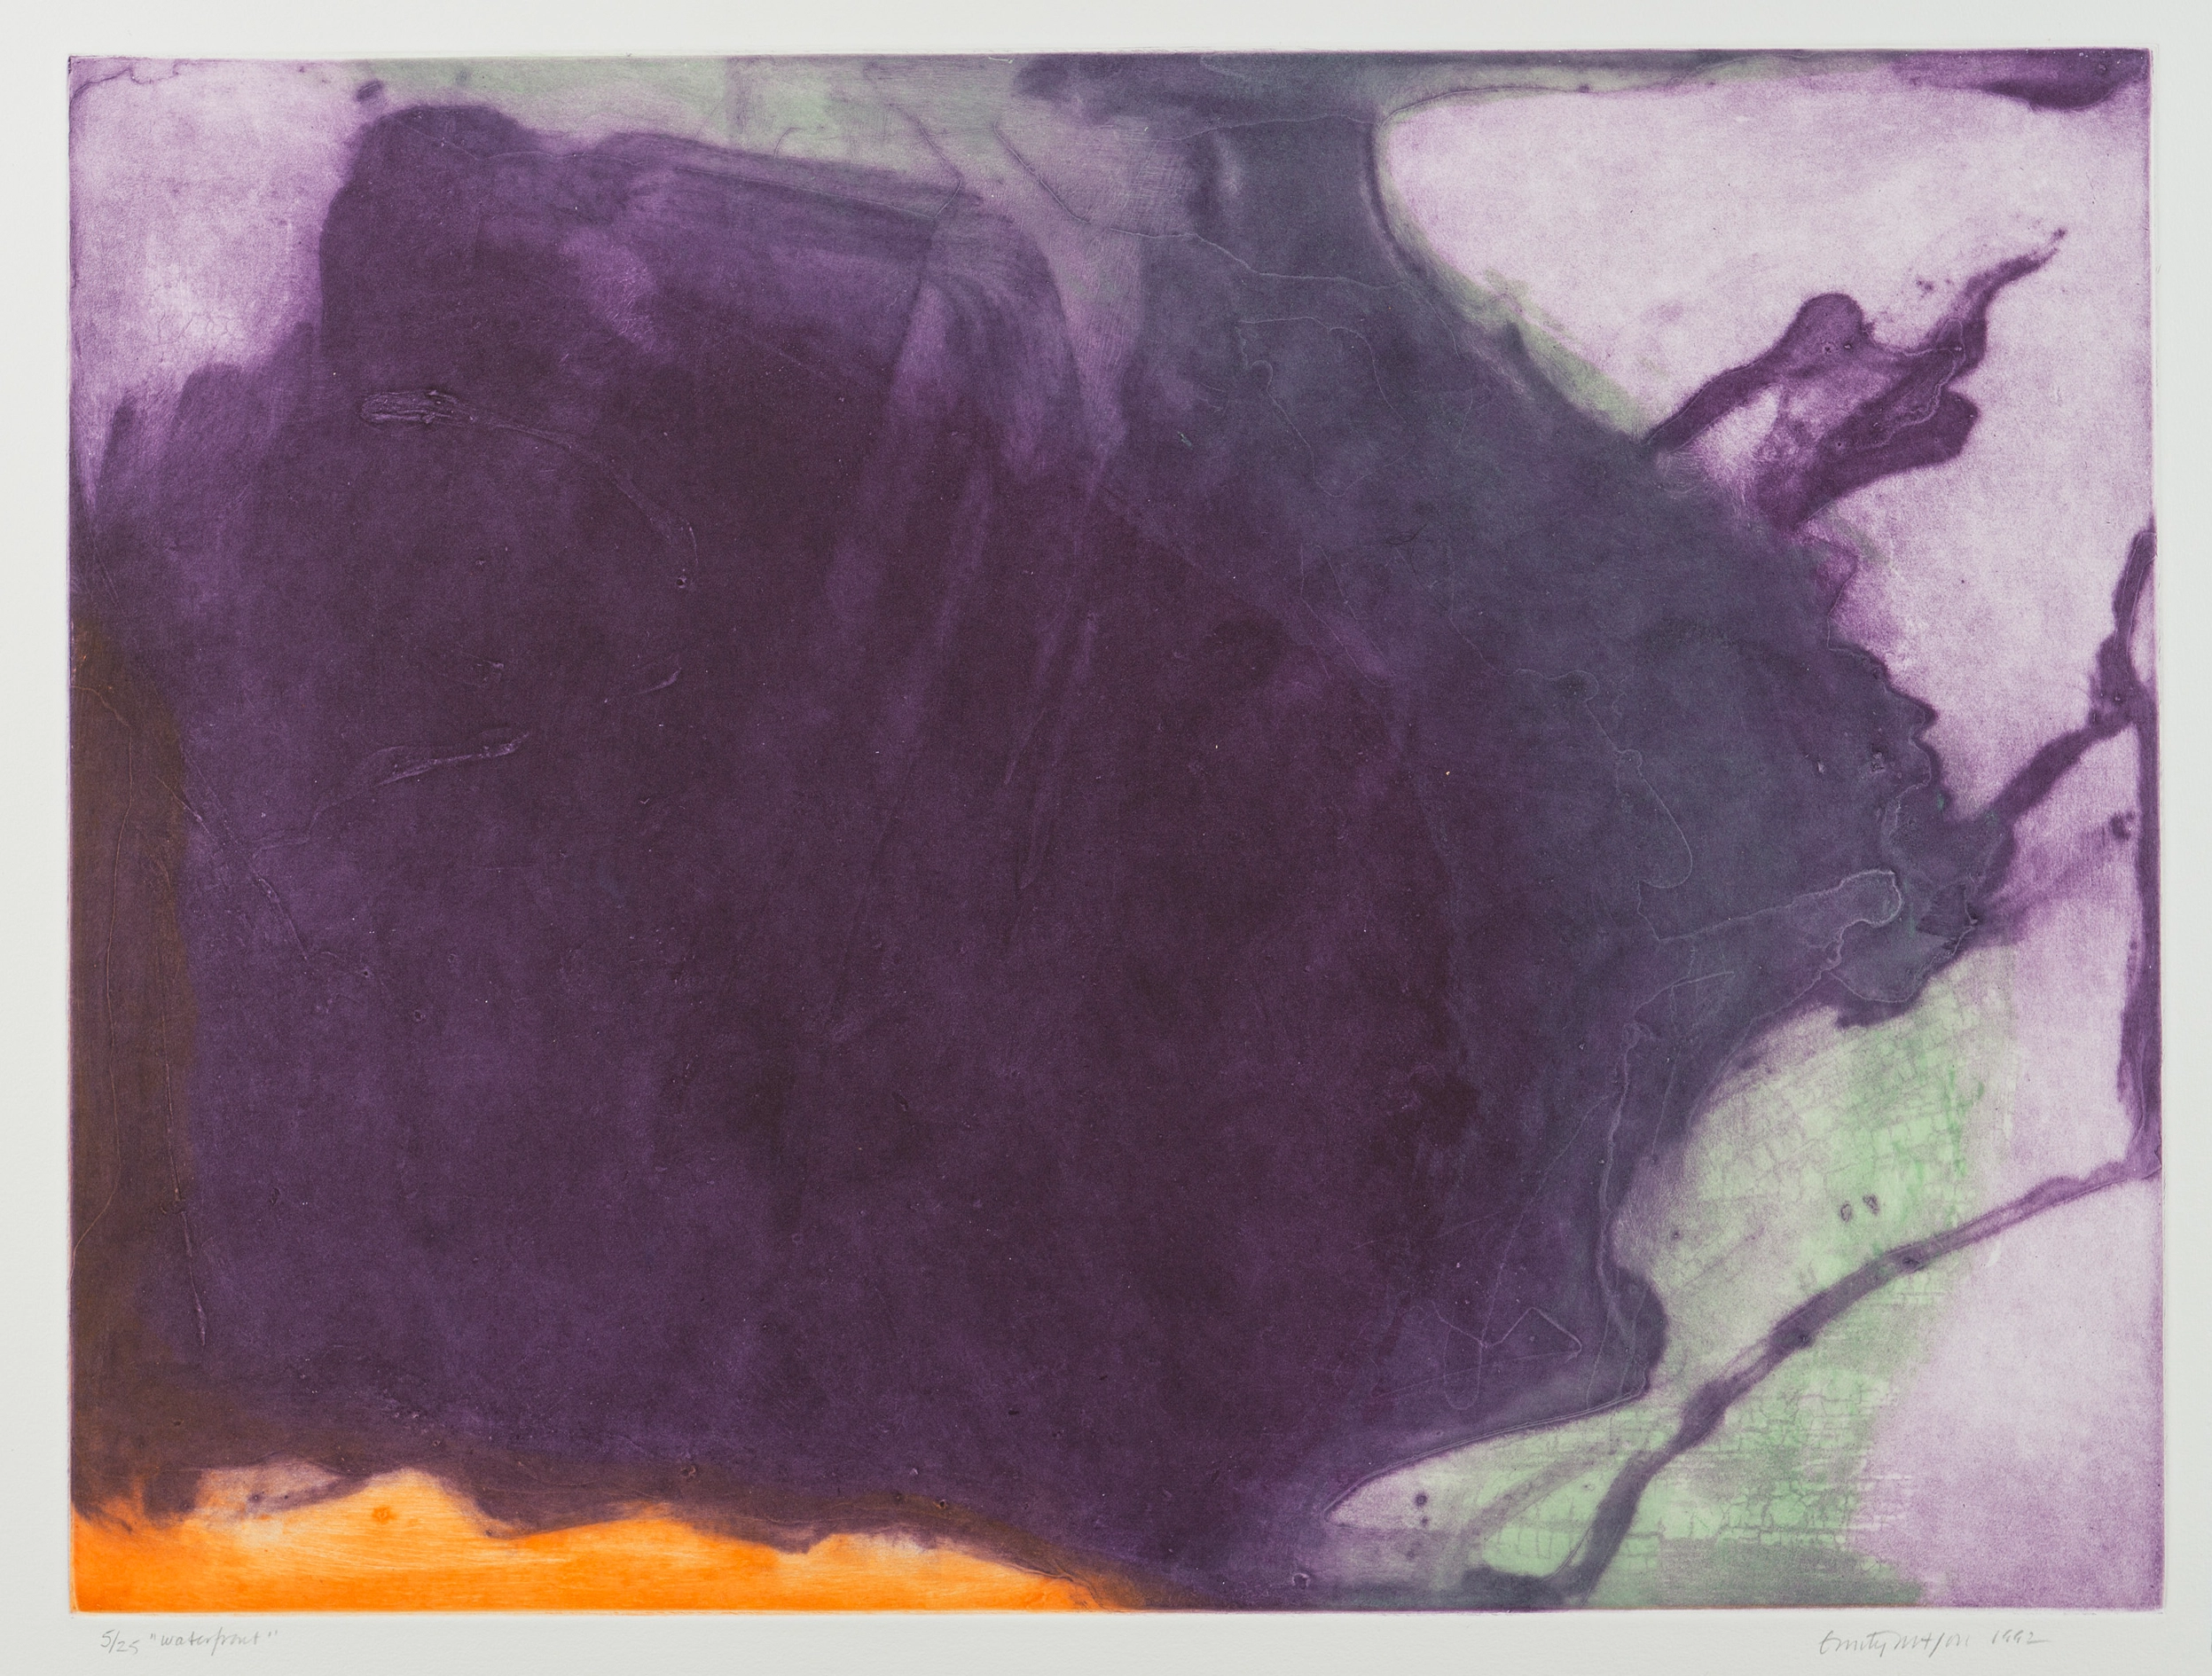 A print with a large purple form layered onto of grey, light purple, and some orange-yellow peeking from the bottom.